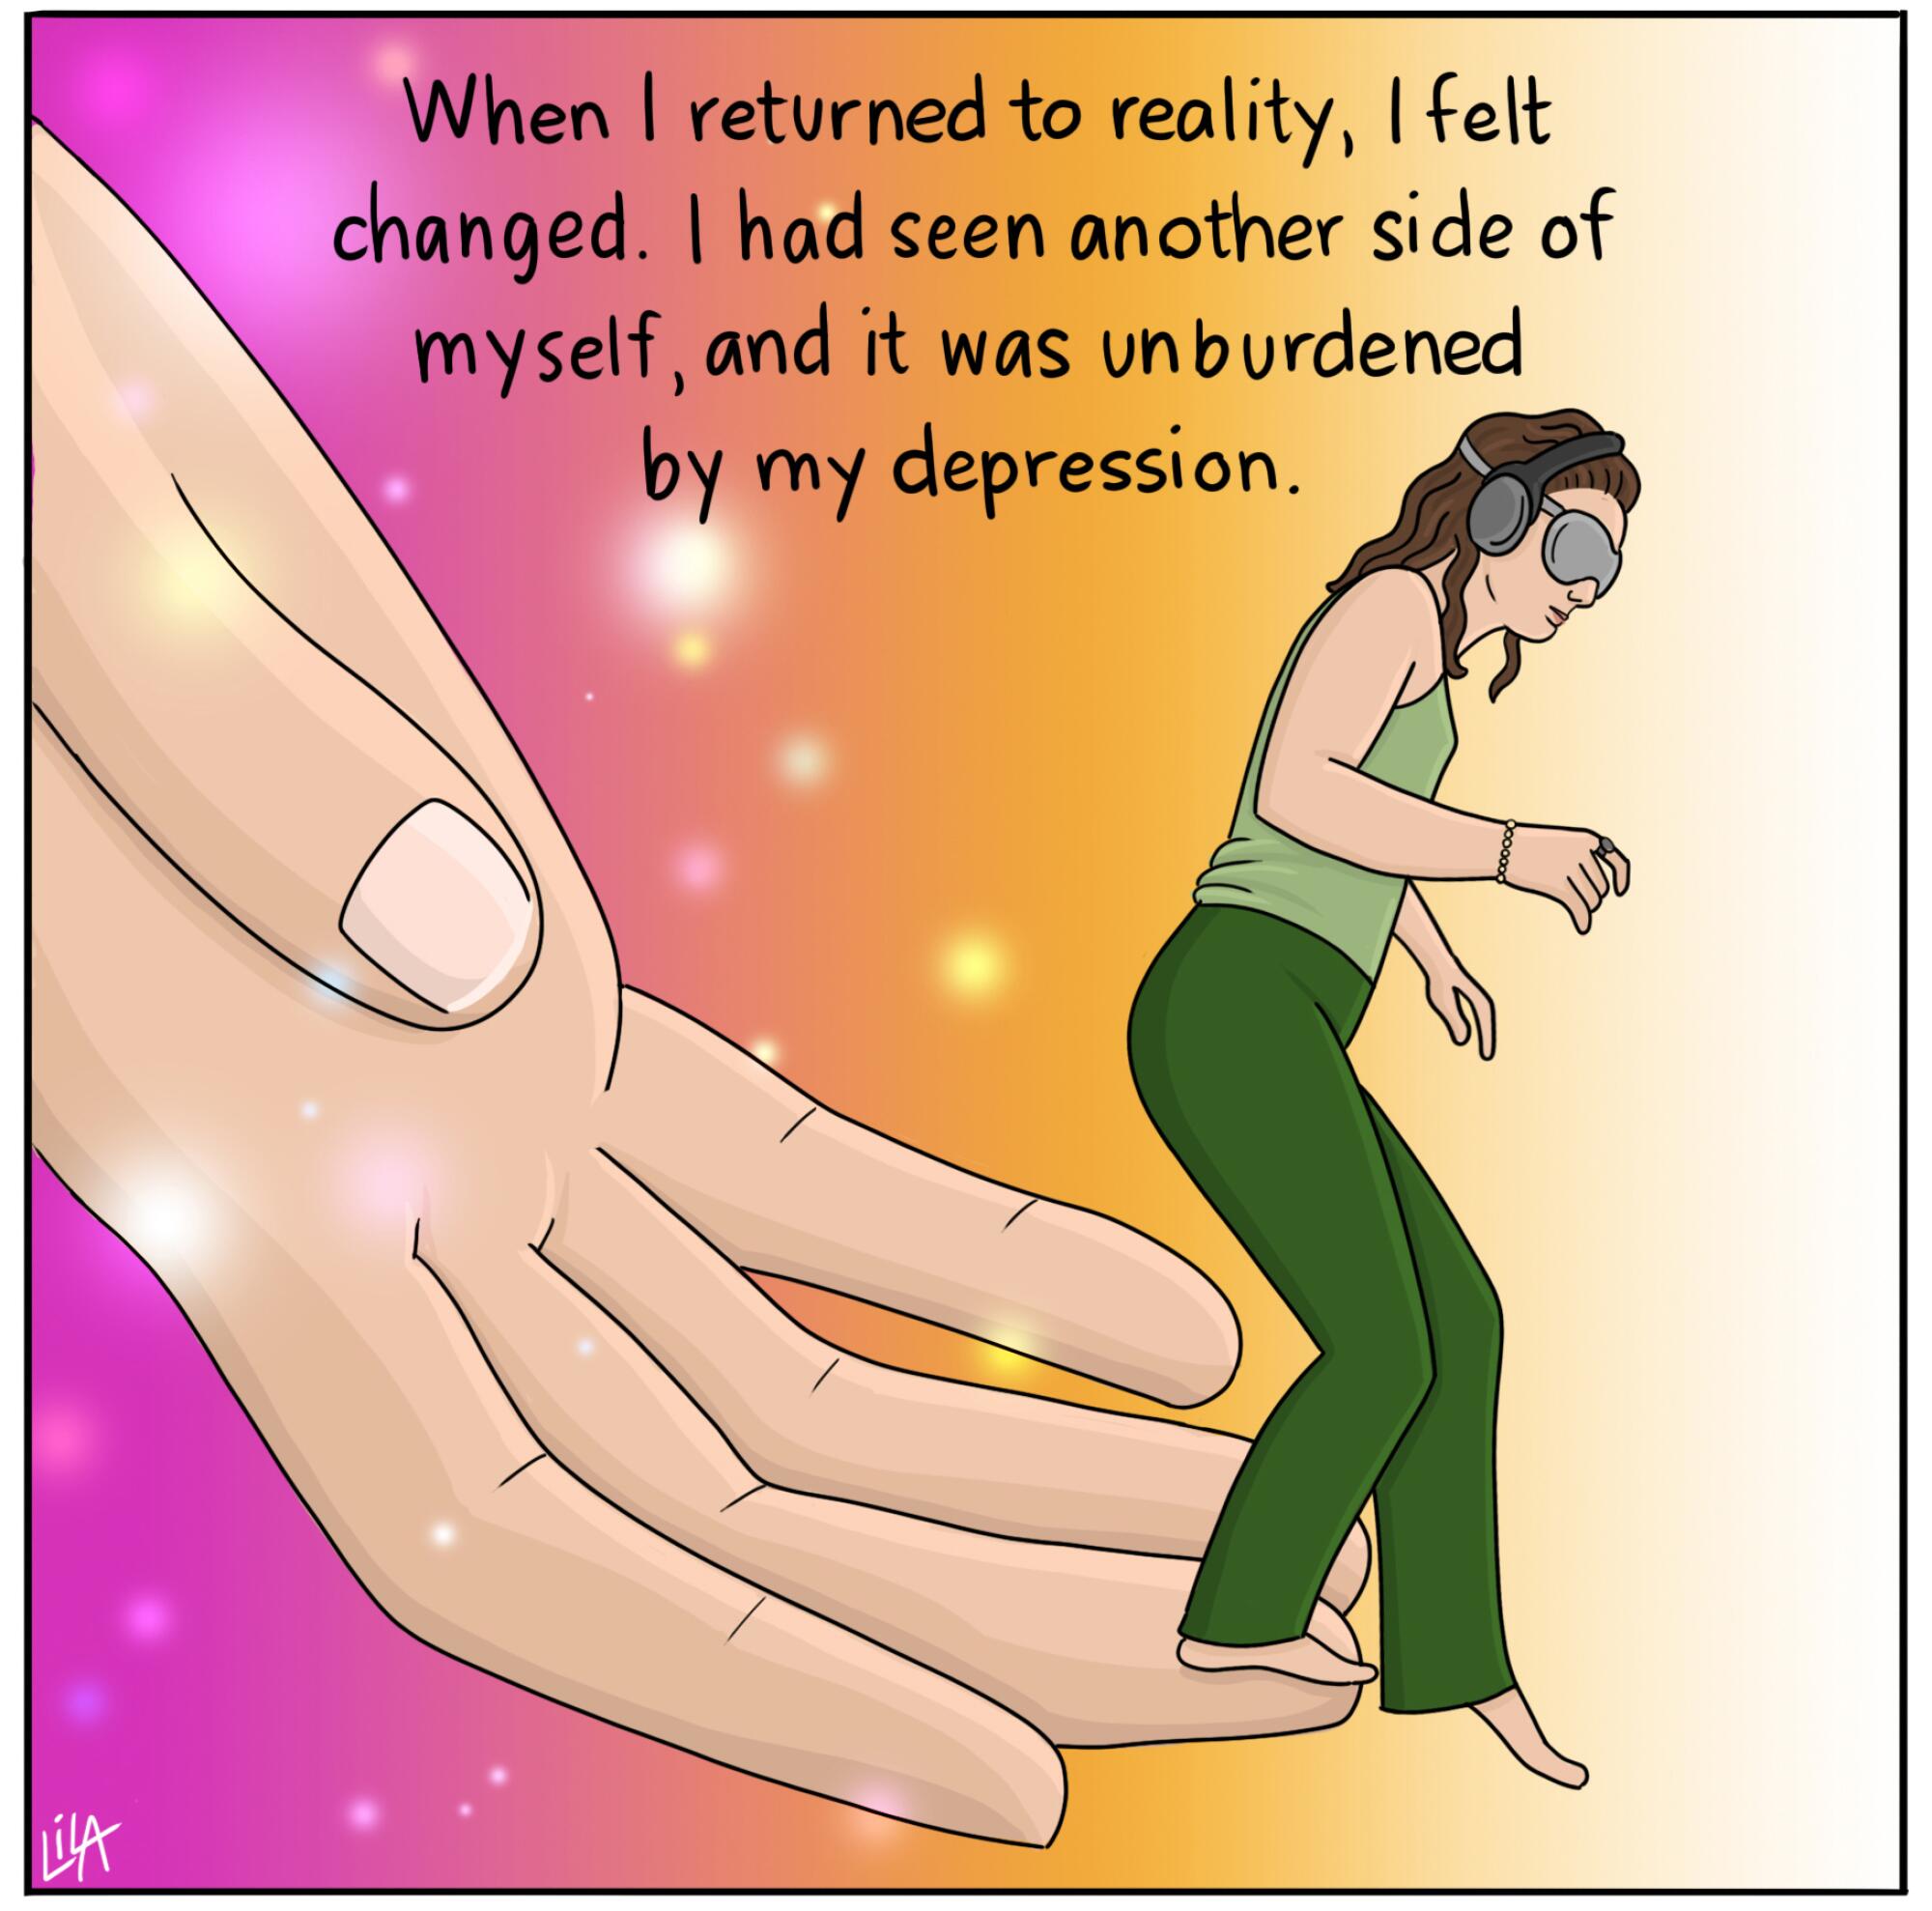 When I returned to reality, I felt changed. I had seen another side of myself, and it was unburdened by my depression.